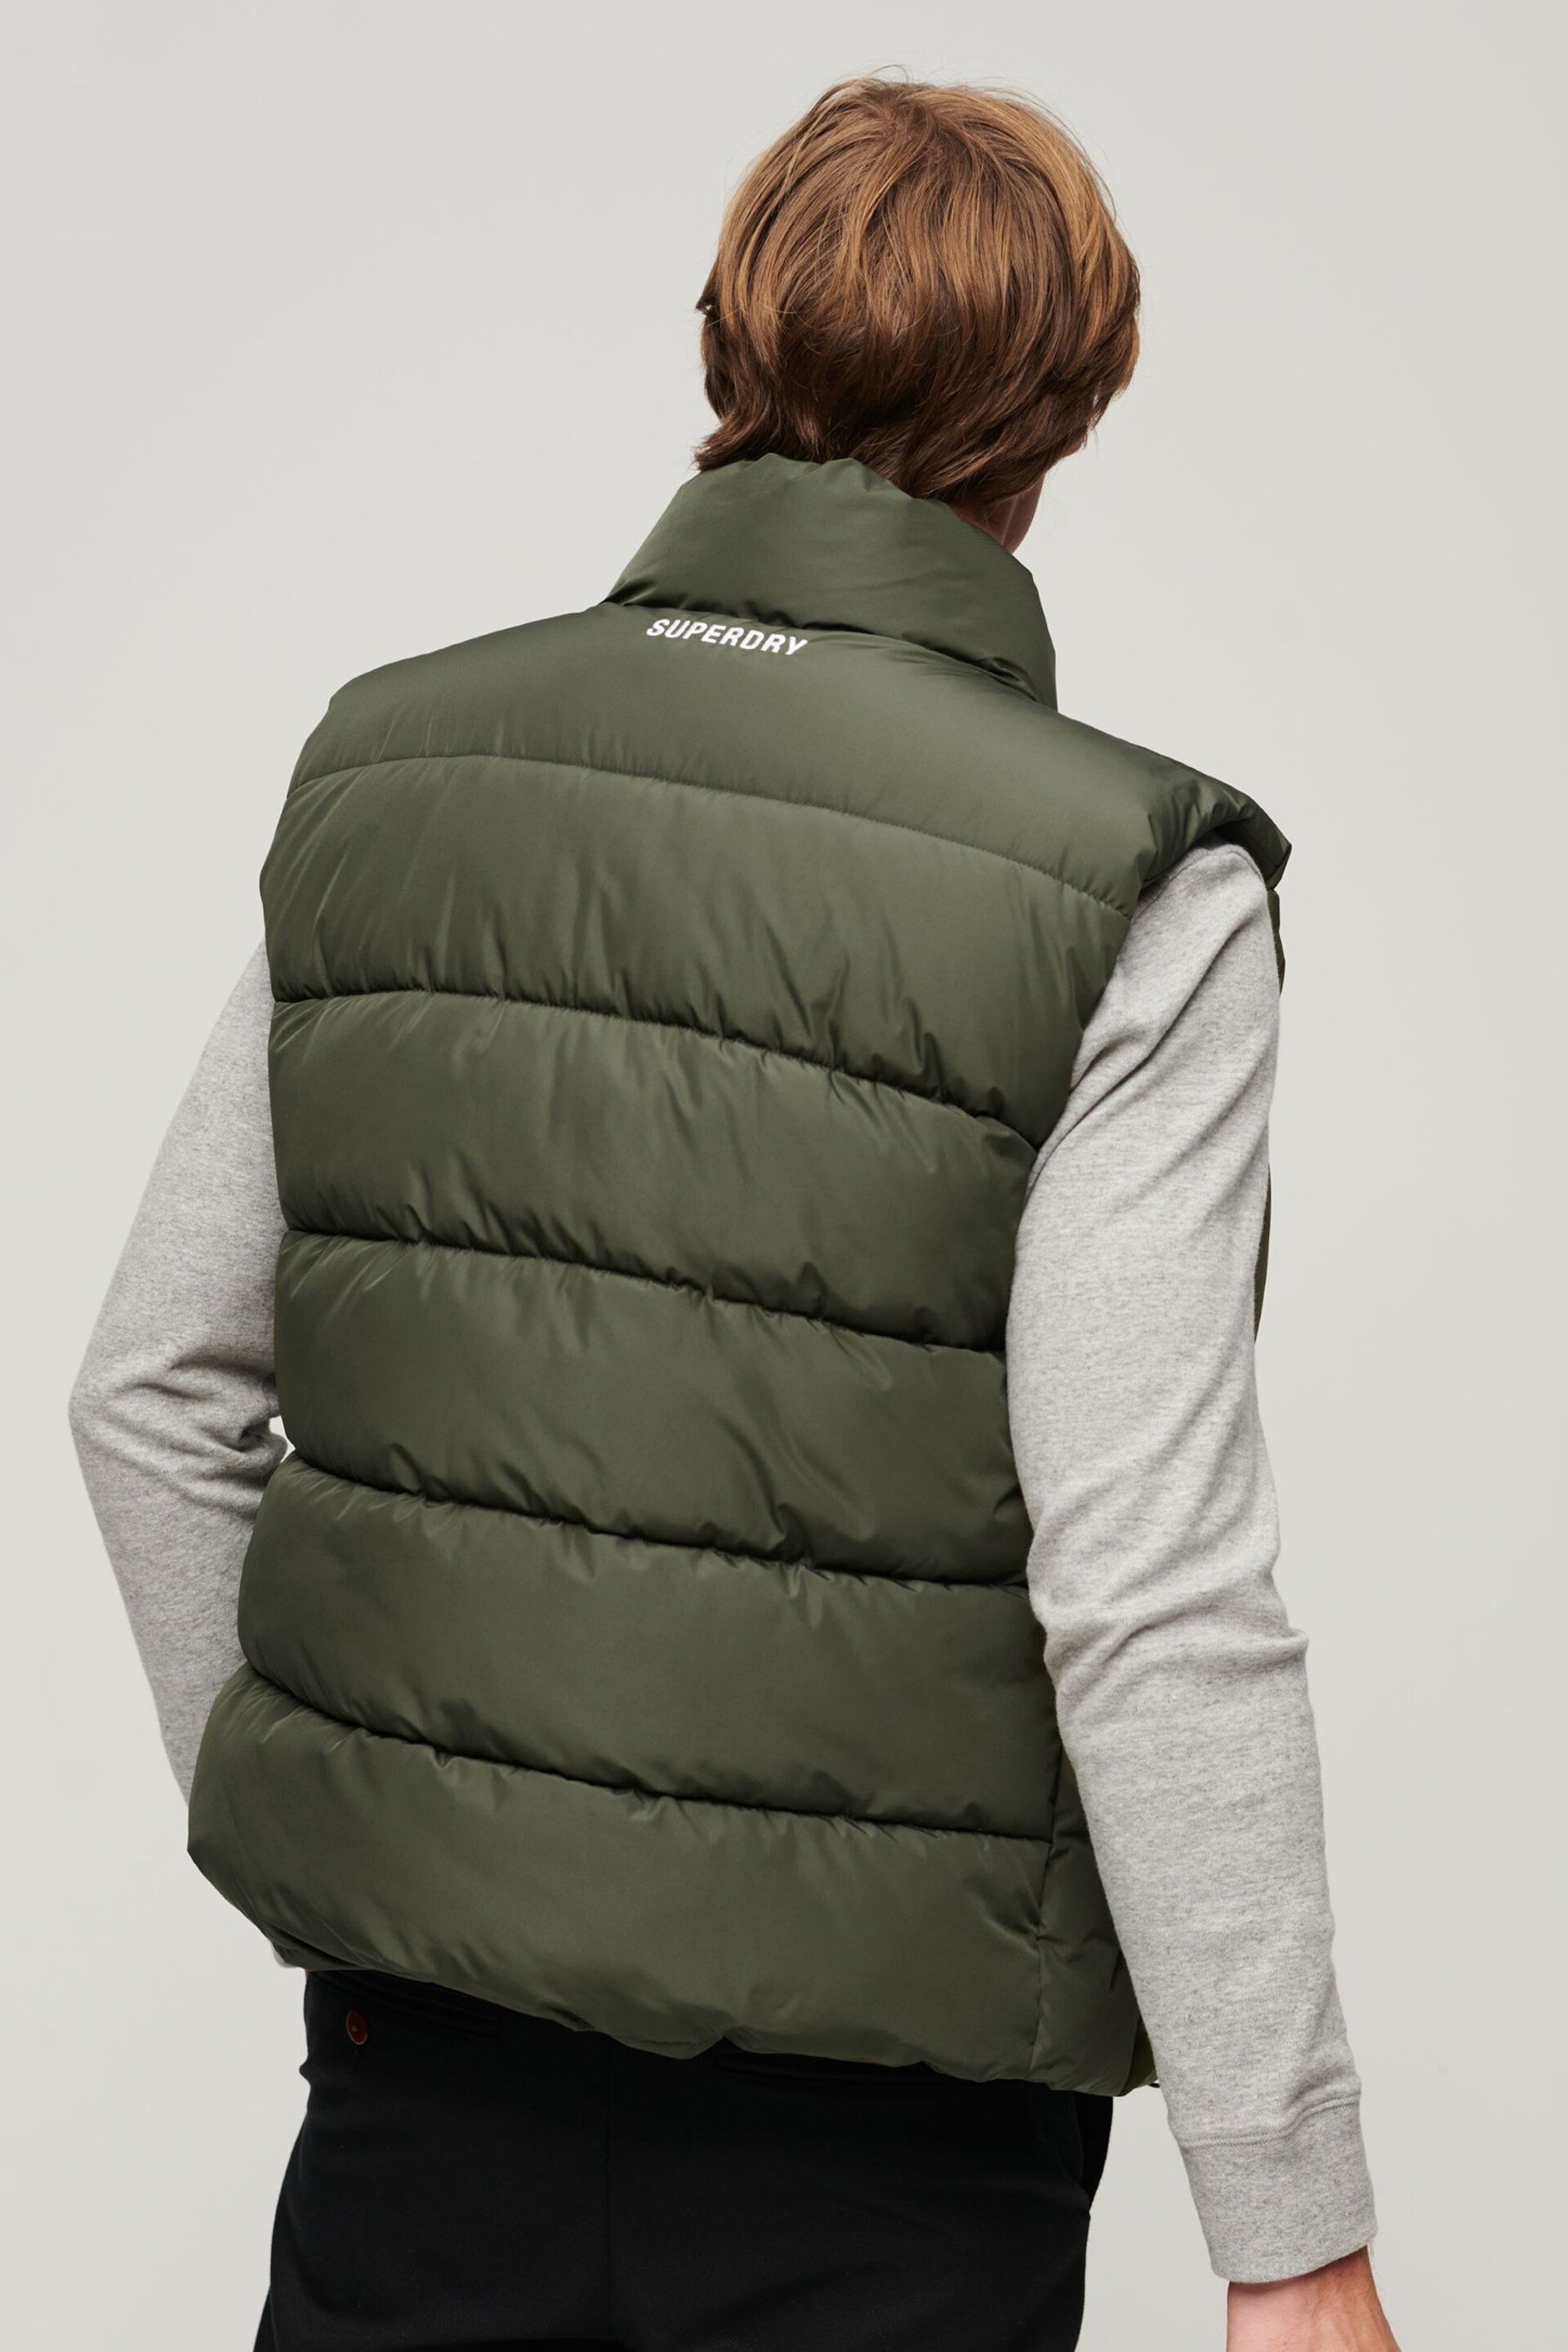 Superdry Green Sports Puffer Gilet - Image 2 of 9